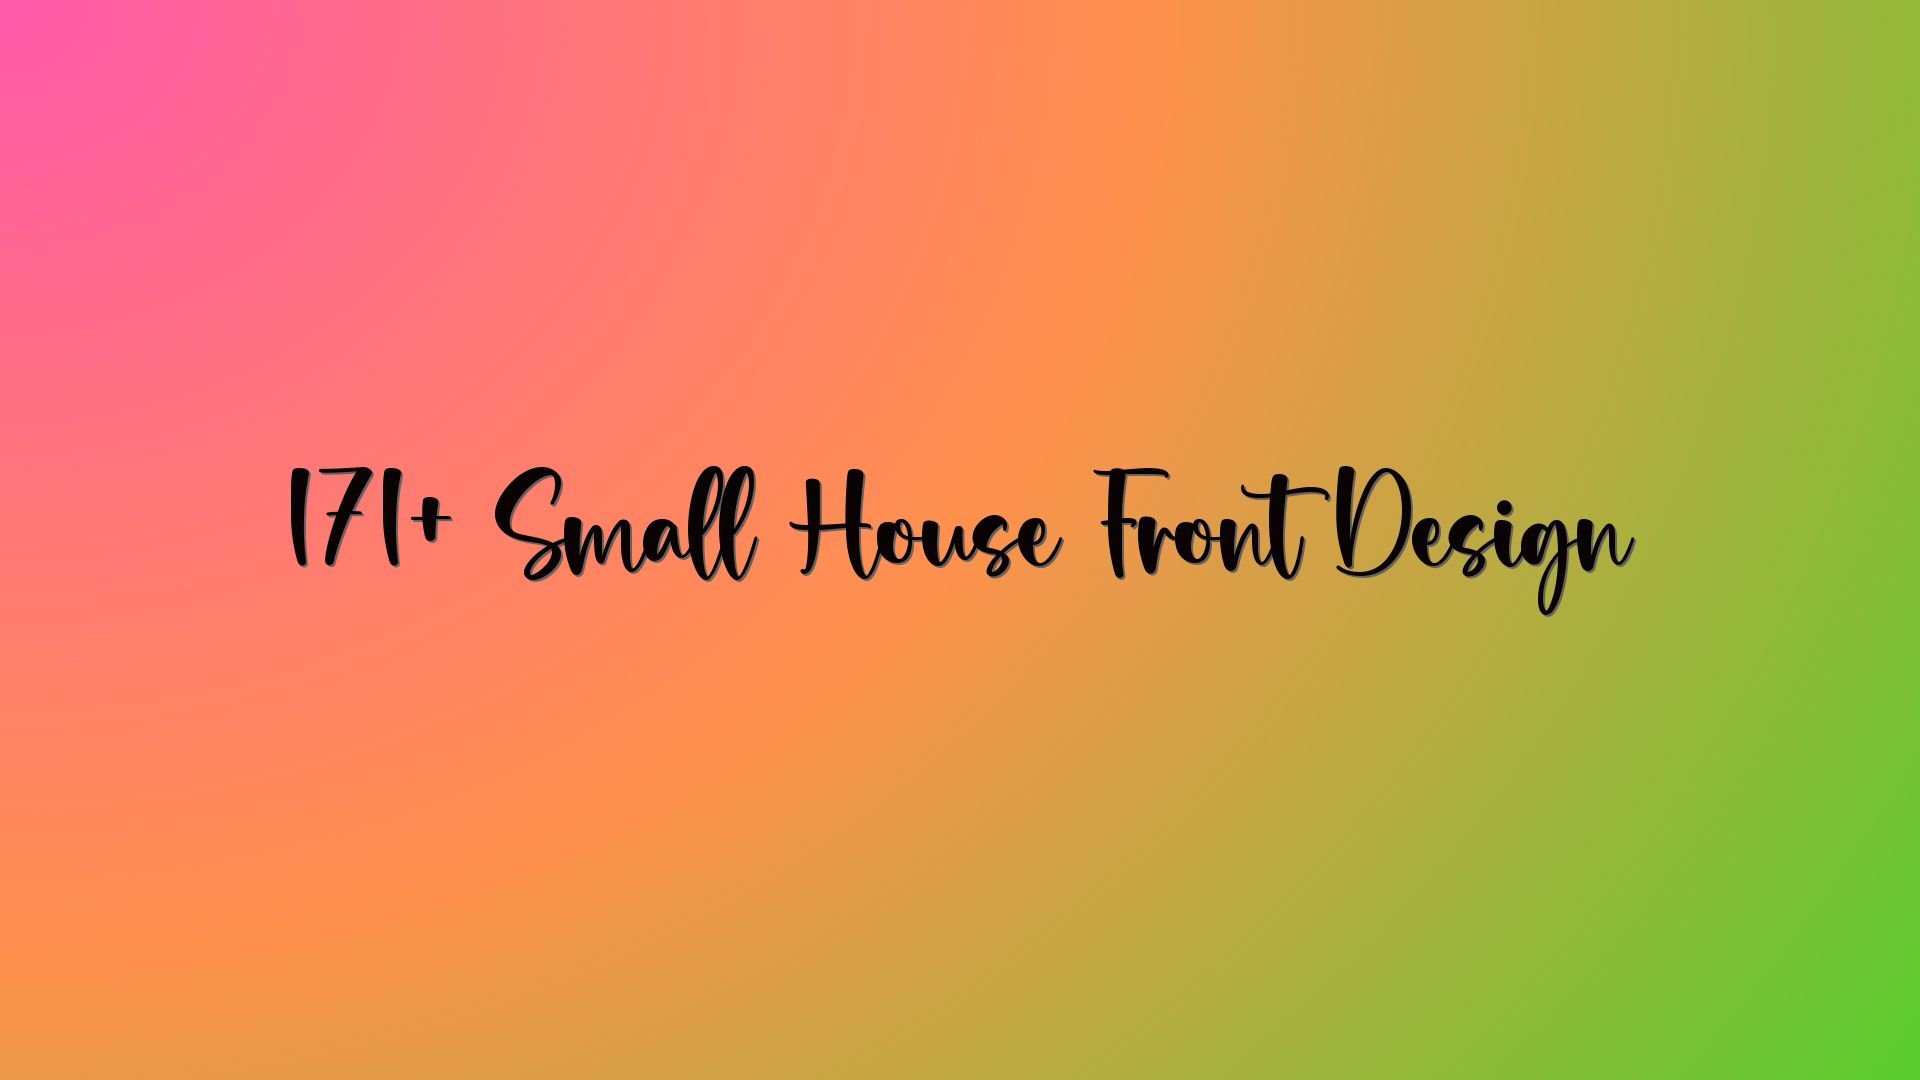 171+ Small House Front Design